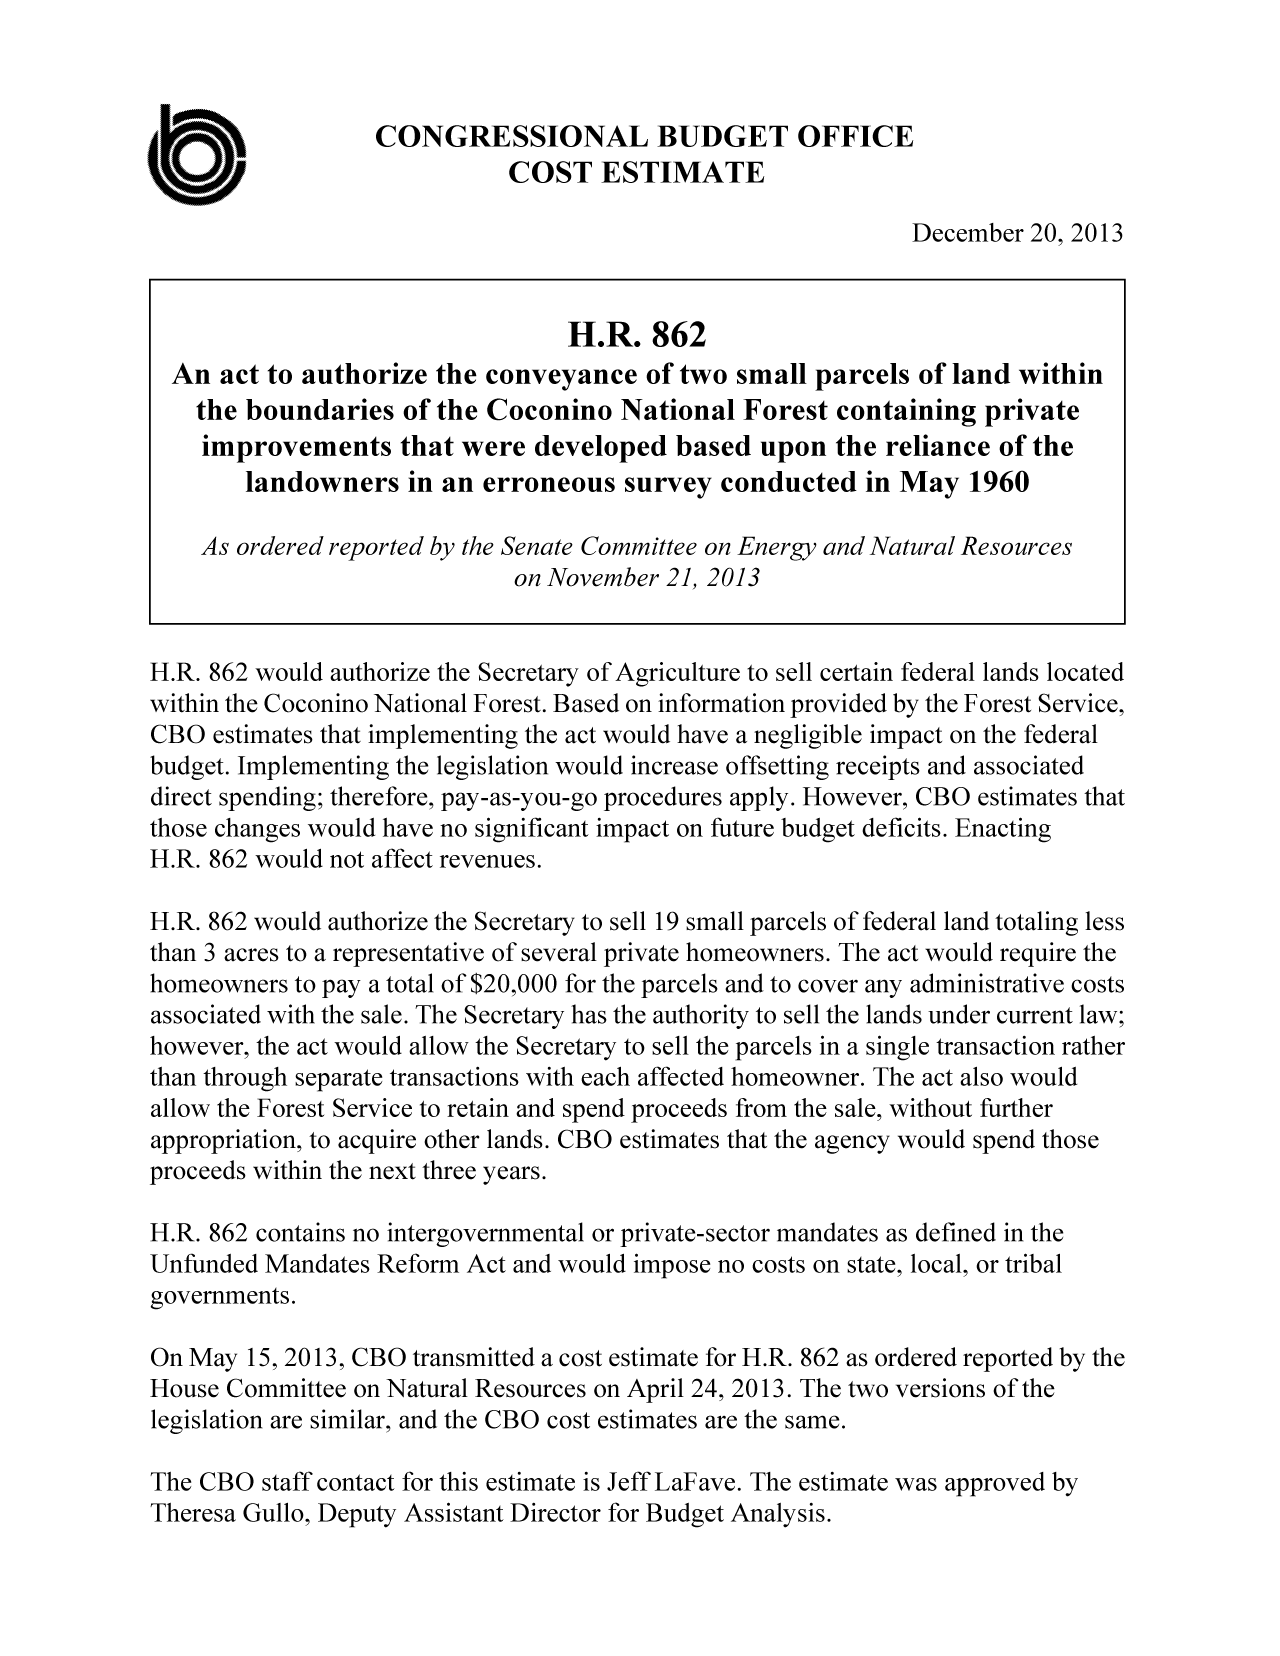 handle is hein.congrec/cbo1433 and id is 1 raw text is: CONGRESSIONAL BUDGET OFFICE
COST ESTIMATE
December 20, 2013
H.R. 862
An act to authorize the conveyance of two small parcels of land within
the boundaries of the Coconino National Forest containing private
improvements that were developed based upon the reliance of the
landowners in an erroneous survey conducted in May 1960
As ordered reported by the Senate Committee on Energy and Natural Resources
on November 21, 2013
H.R. 862 would authorize the Secretary of Agriculture to sell certain federal lands located
within the Coconino National Forest. Based on information provided by the Forest Service,
CBO estimates that implementing the act would have a negligible impact on the federal
budget. Implementing the legislation would increase offsetting receipts and associated
direct spending; therefore, pay-as-you-go procedures apply. However, CBO estimates that
those changes would have no significant impact on future budget deficits. Enacting
H.R. 862 would not affect revenues.
H.R. 862 would authorize the Secretary to sell 19 small parcels of federal land totaling less
than 3 acres to a representative of several private homeowners. The act would require the
homeowners to pay a total of $20,000 for the parcels and to cover any administrative costs
associated with the sale. The Secretary has the authority to sell the lands under current law;
however, the act would allow the Secretary to sell the parcels in a single transaction rather
than through separate transactions with each affected homeowner. The act also would
allow the Forest Service to retain and spend proceeds from the sale, without further
appropriation, to acquire other lands. CBO estimates that the agency would spend those
proceeds within the next three years.
H.R. 862 contains no intergovernmental or private-sector mandates as defined in the
Unfunded Mandates Reform Act and would impose no costs on state, local, or tribal
governments.
On May 15, 2013, CBO transmitted a cost estimate for H.R. 862 as ordered reported by the
House Committee on Natural Resources on April 24, 2013. The two versions of the
legislation are similar, and the CBO cost estimates are the same.
The CBO staff contact for this estimate is Jeff LaFave. The estimate was approved by

Theresa Gullo, Deputy Assistant Director for Budget Analysis.


